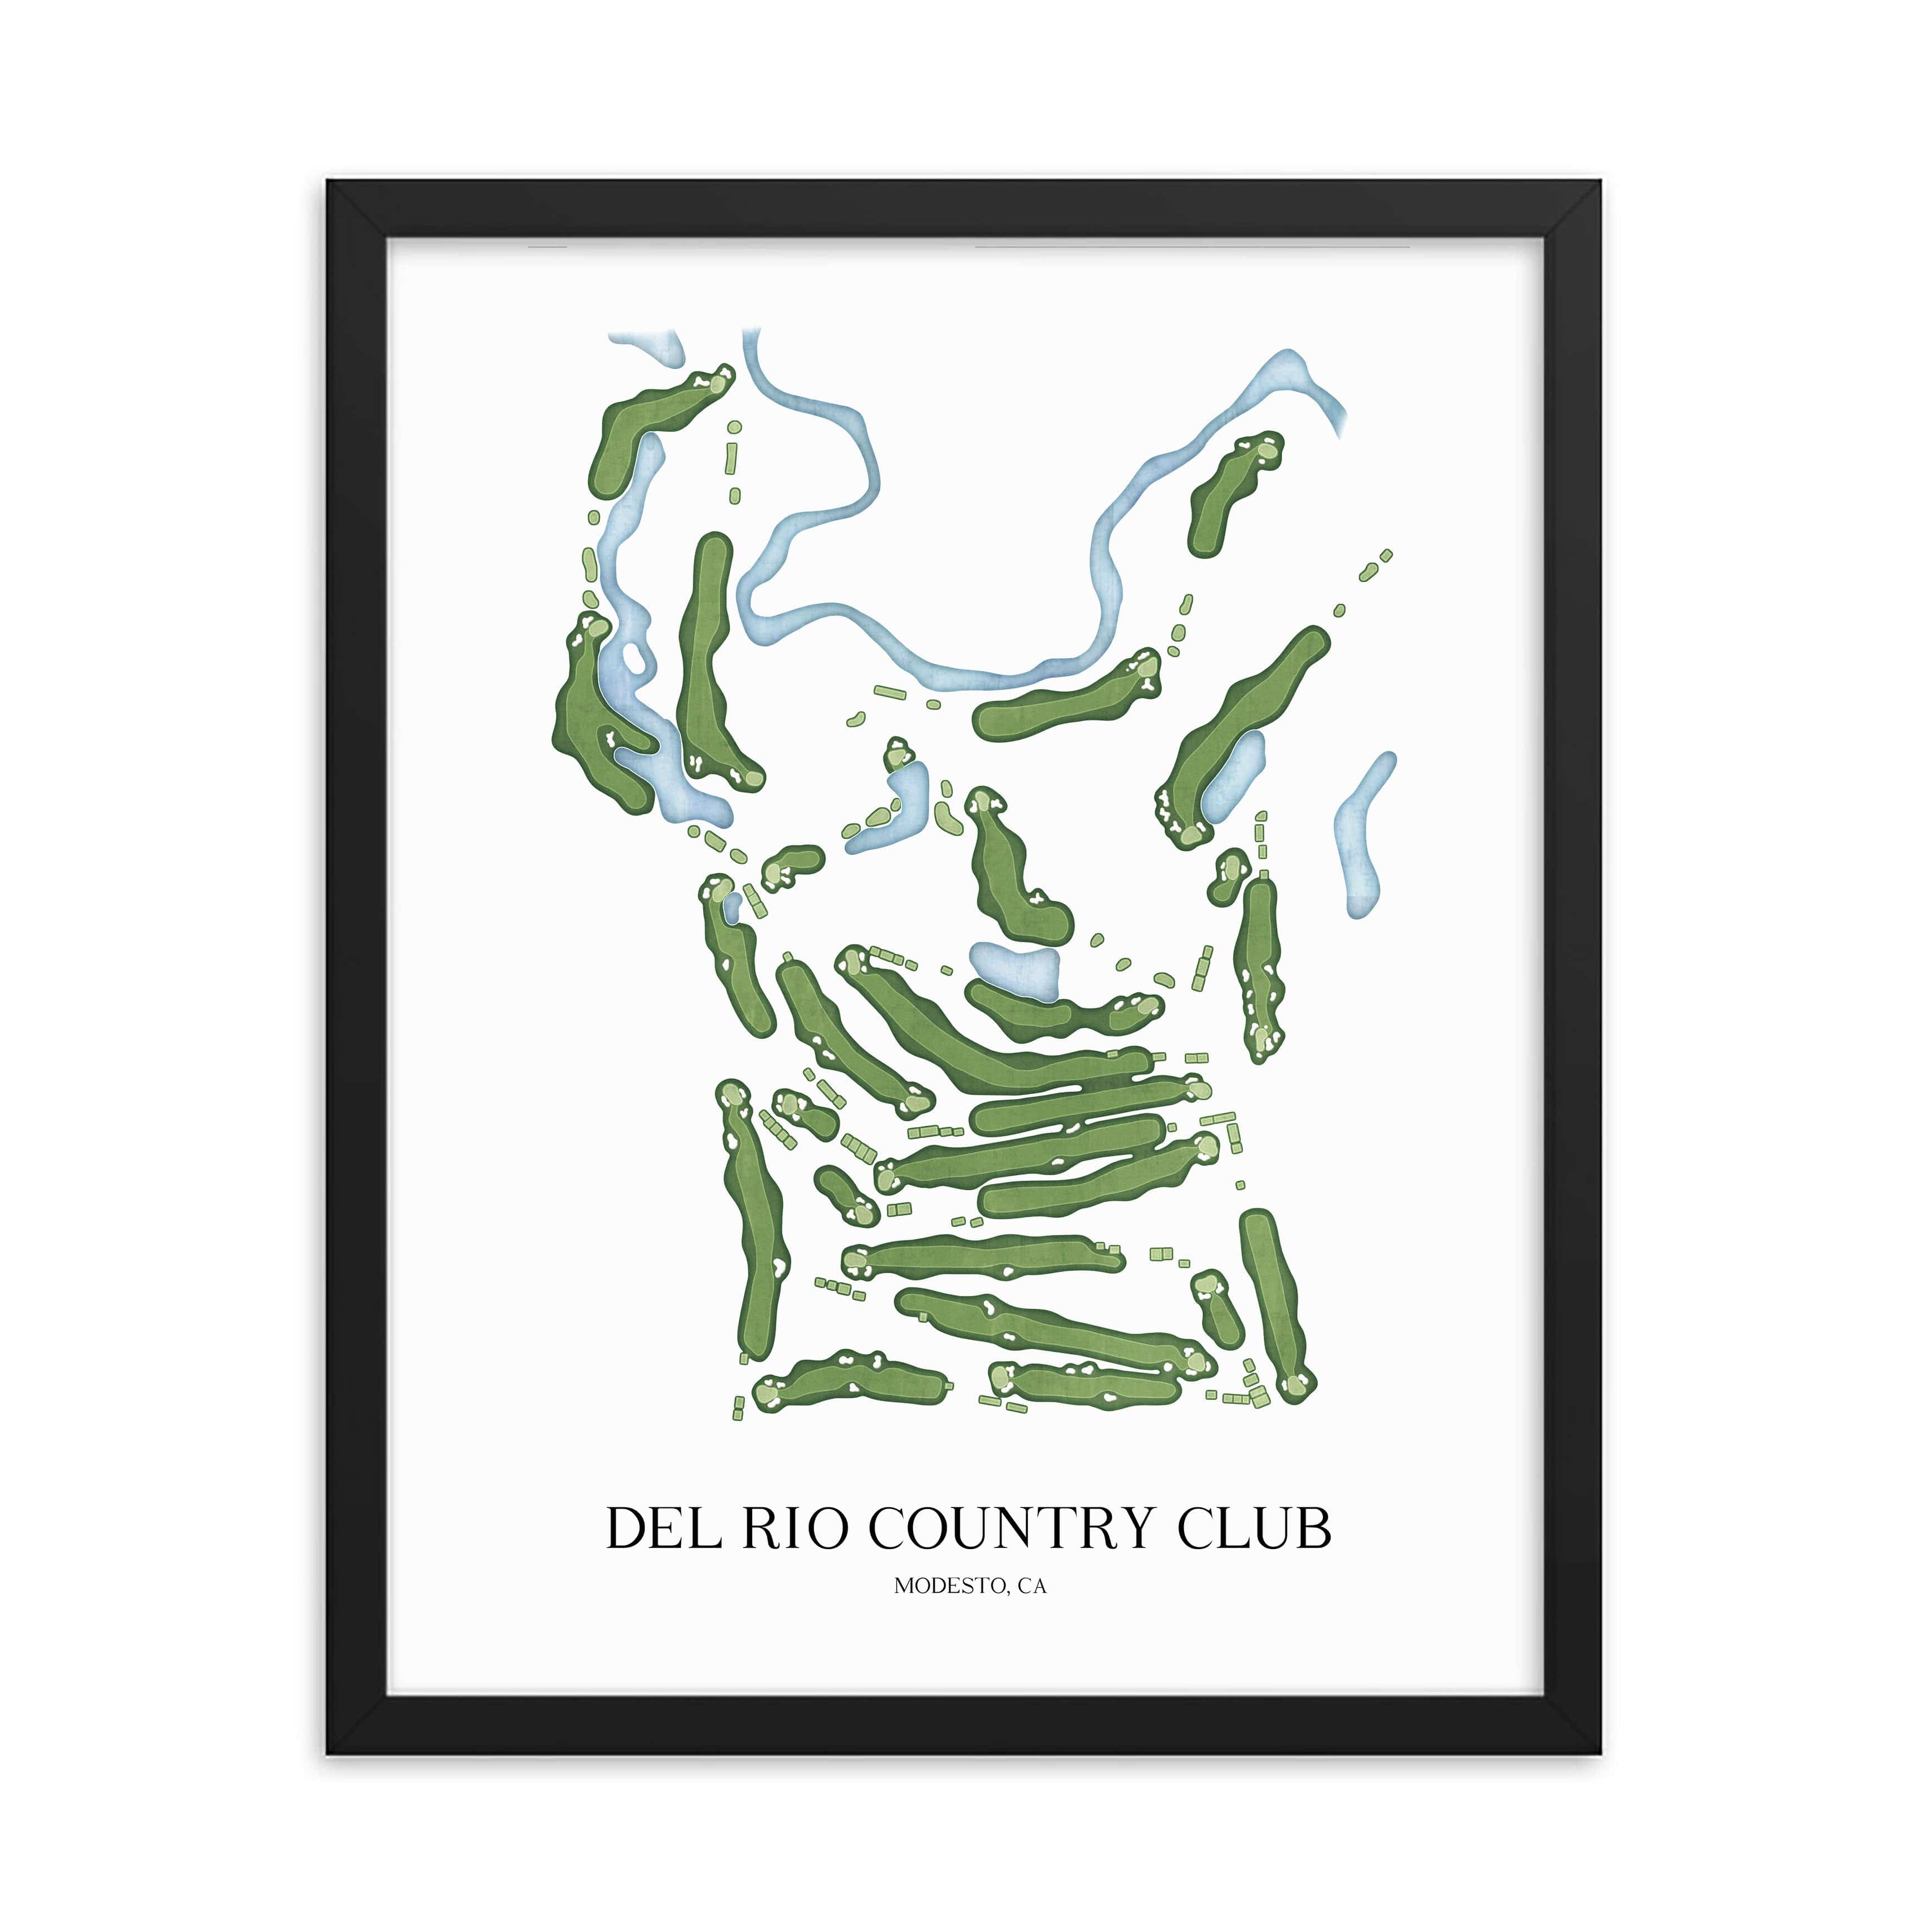 The 19th Hole Golf Shop - Golf Course Prints -  Del Rio Country Club Golf Course Map